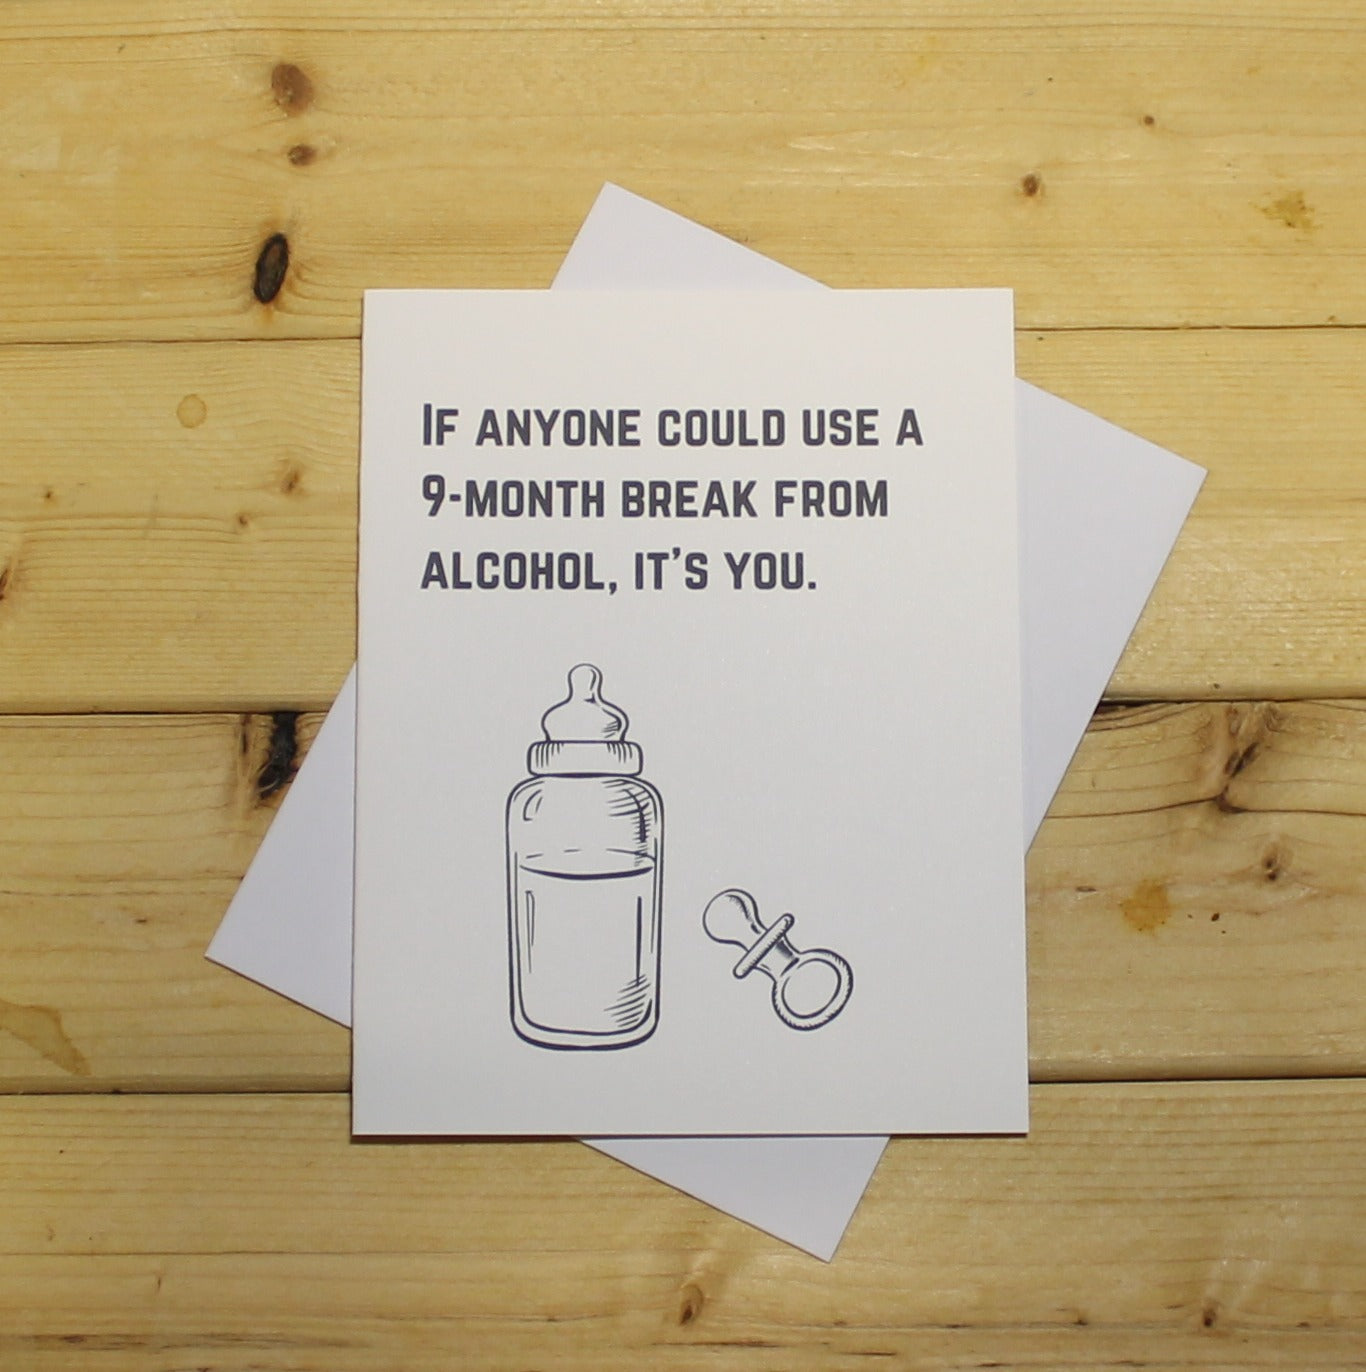 Funny Baby Card: "If anyone could use a 9-month break from alcohol, it's you."